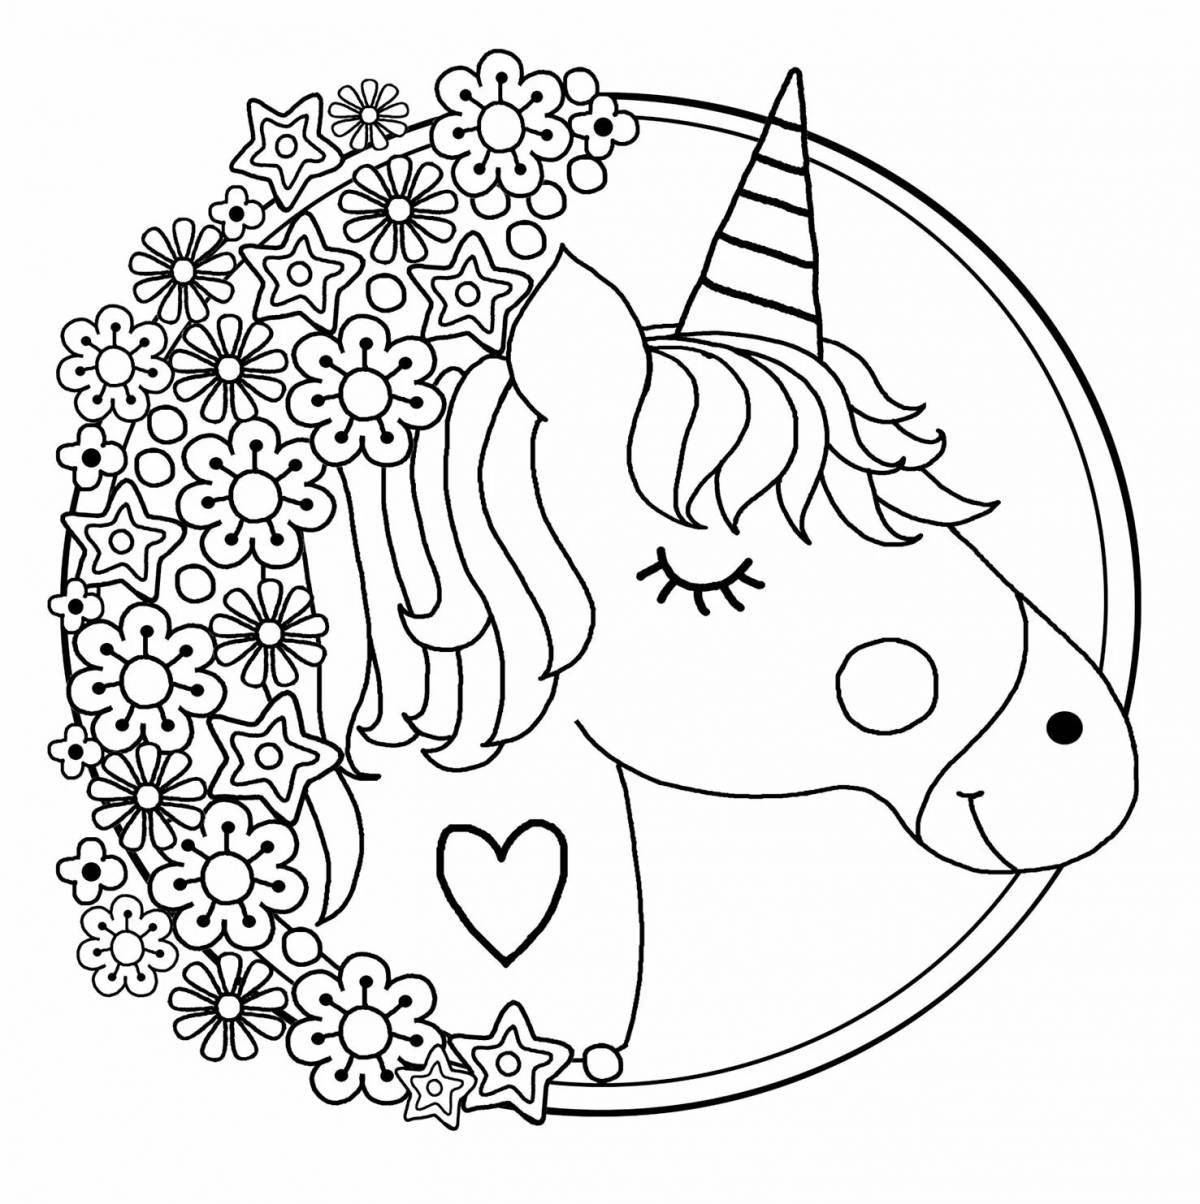 Coloring book for girls cute unicorn